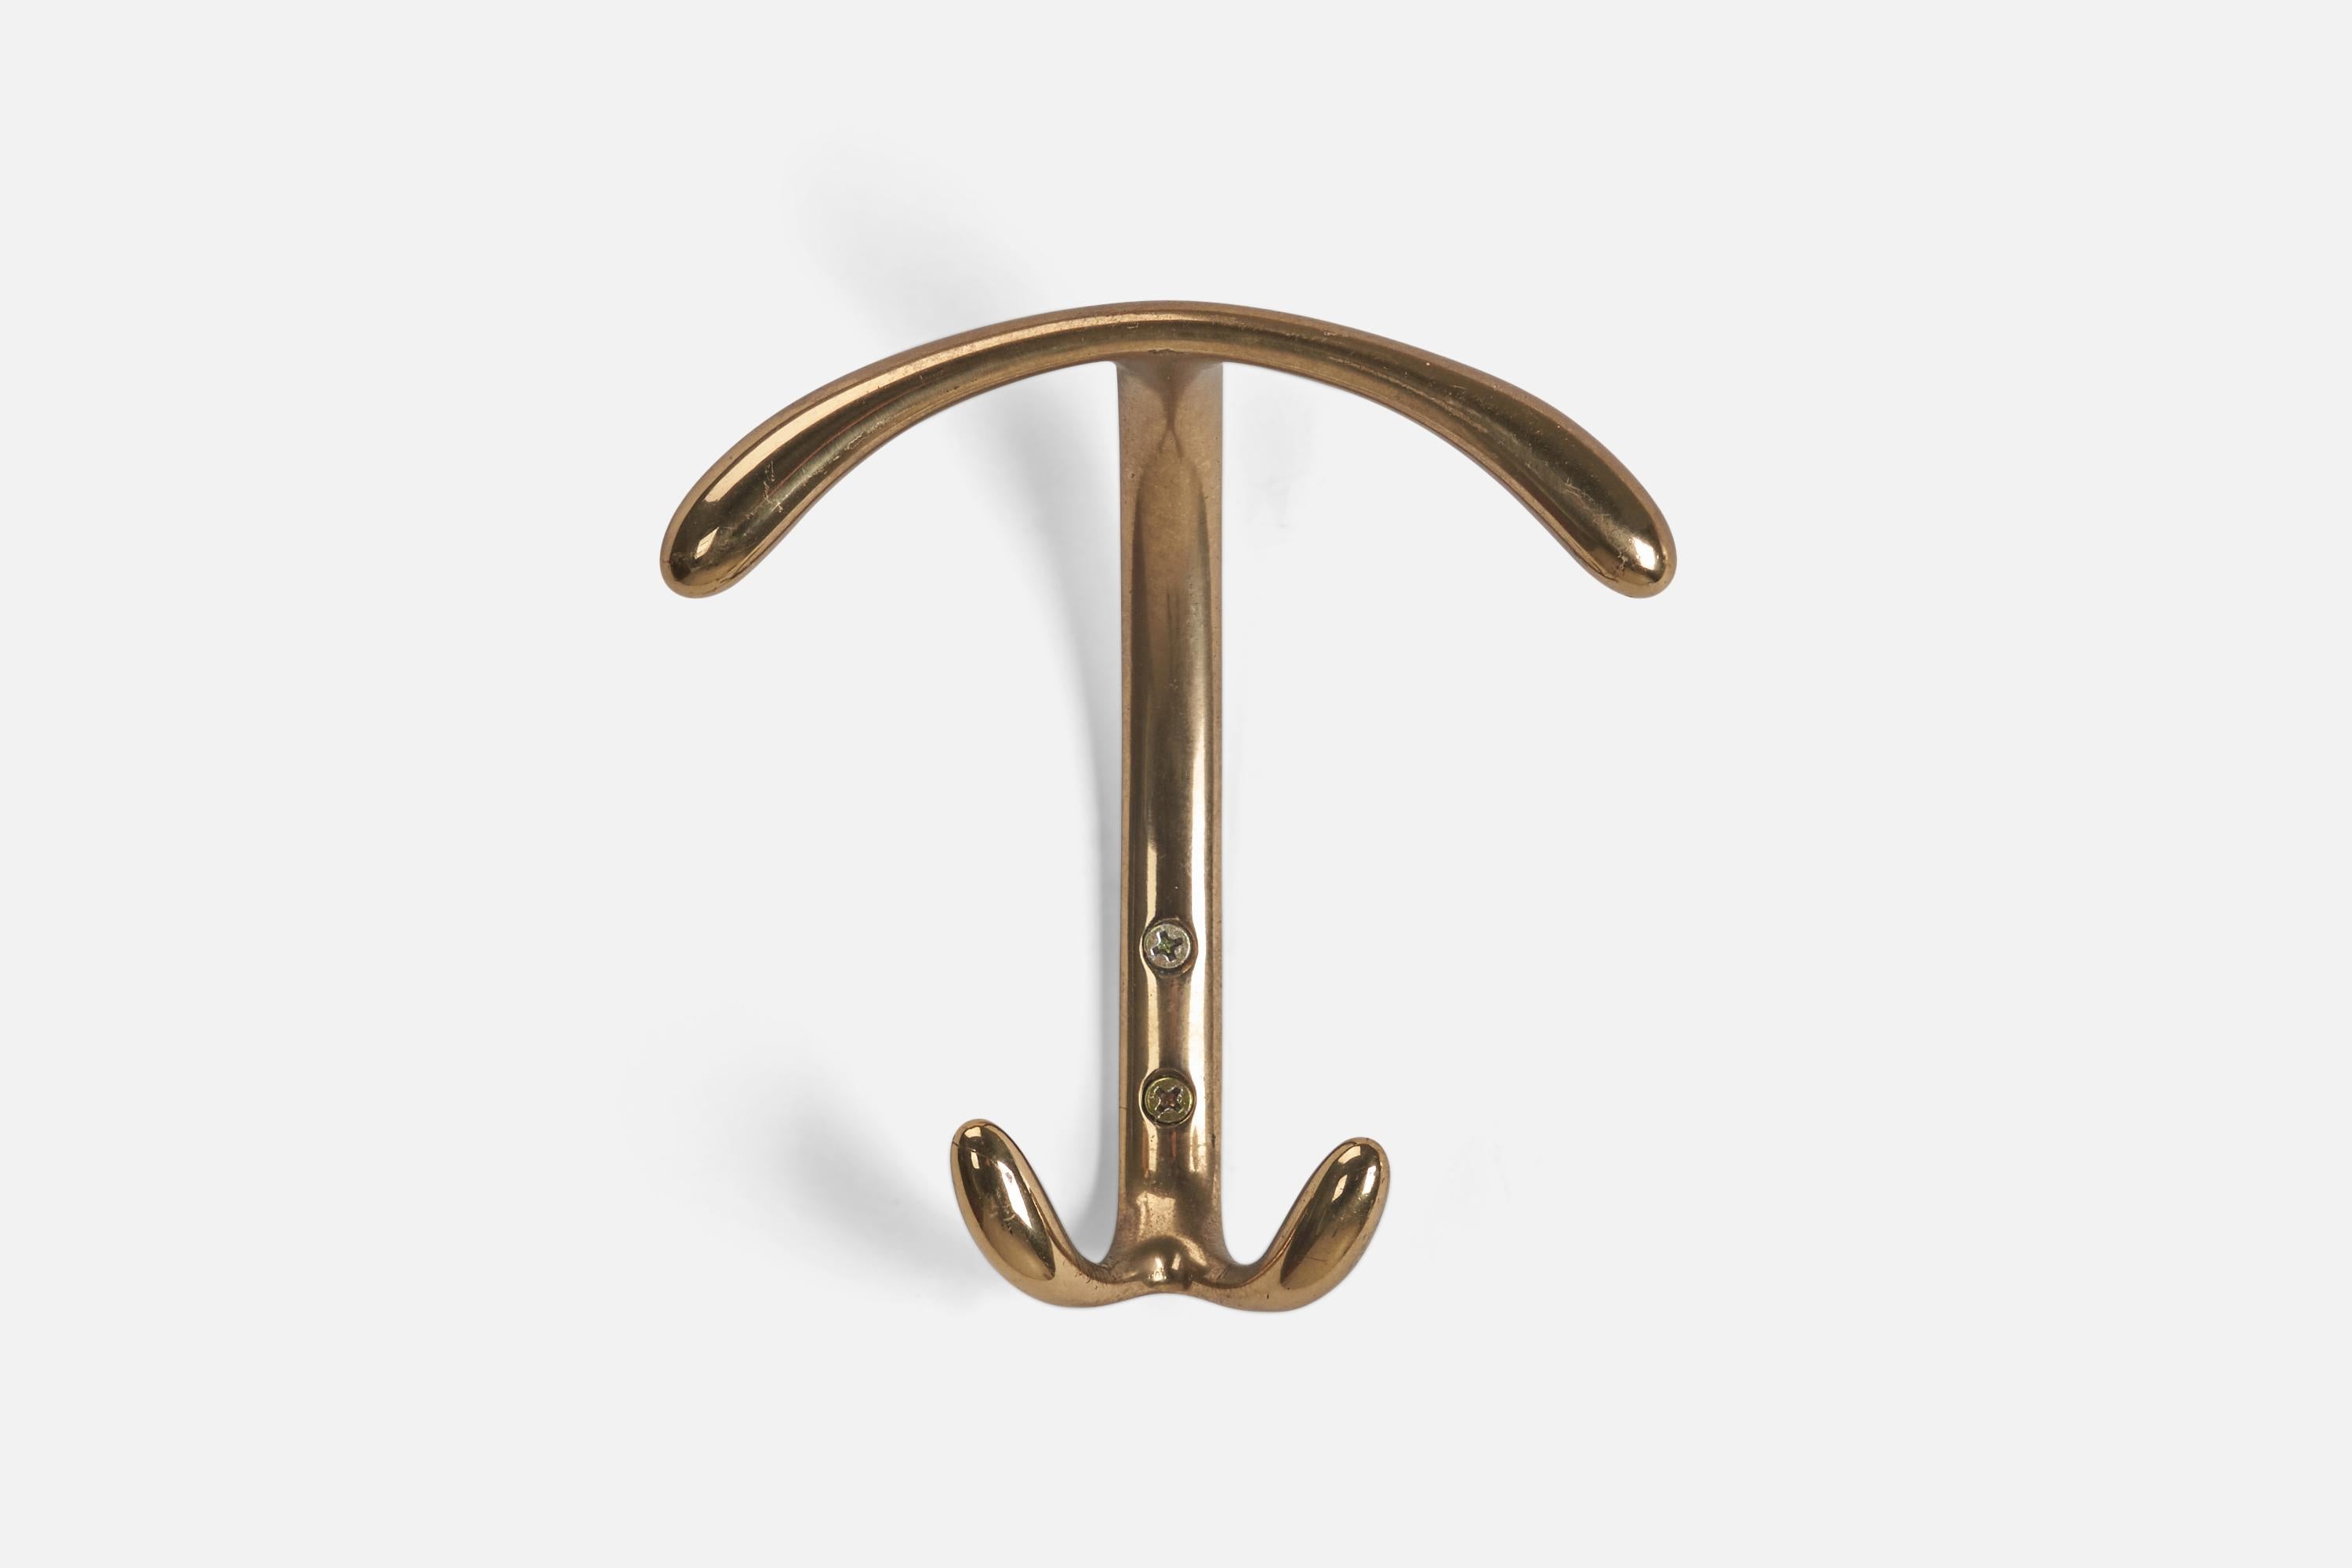 A set of brass coat hangers designed and produced by an Italian Designer, Italy, 1960s.